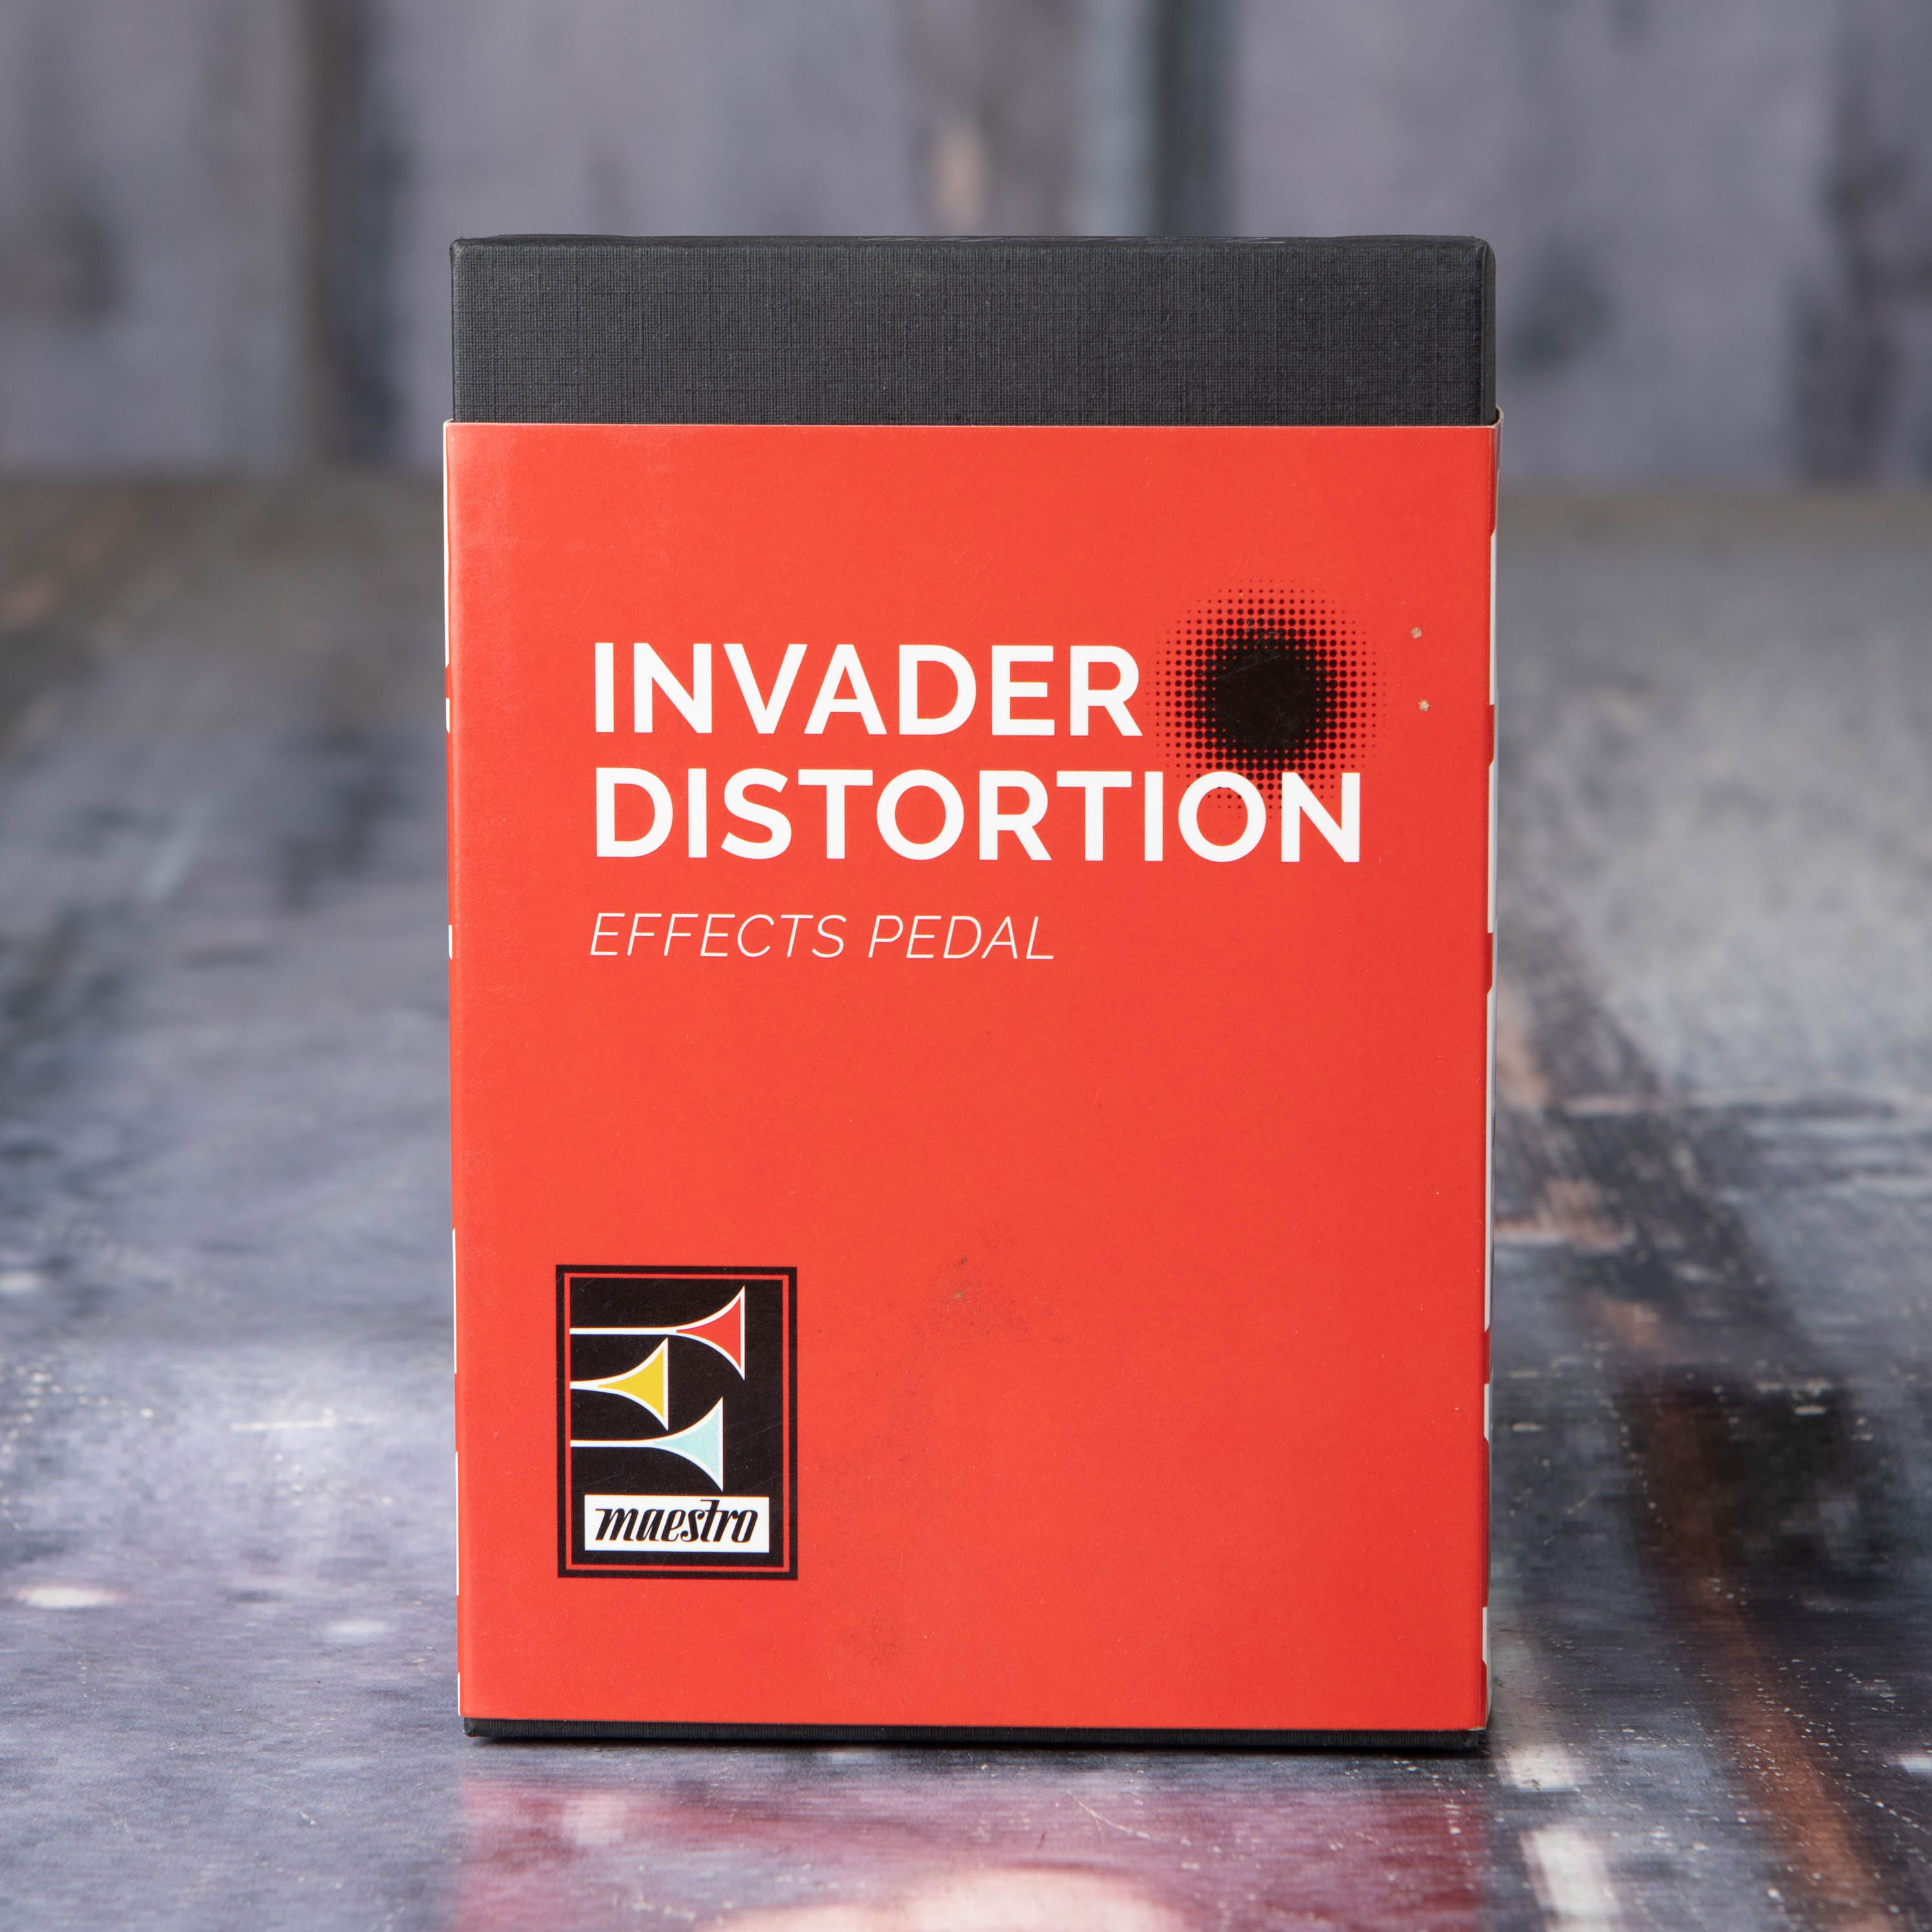 Used Maestro Invader Distortion Effects Pedal, box